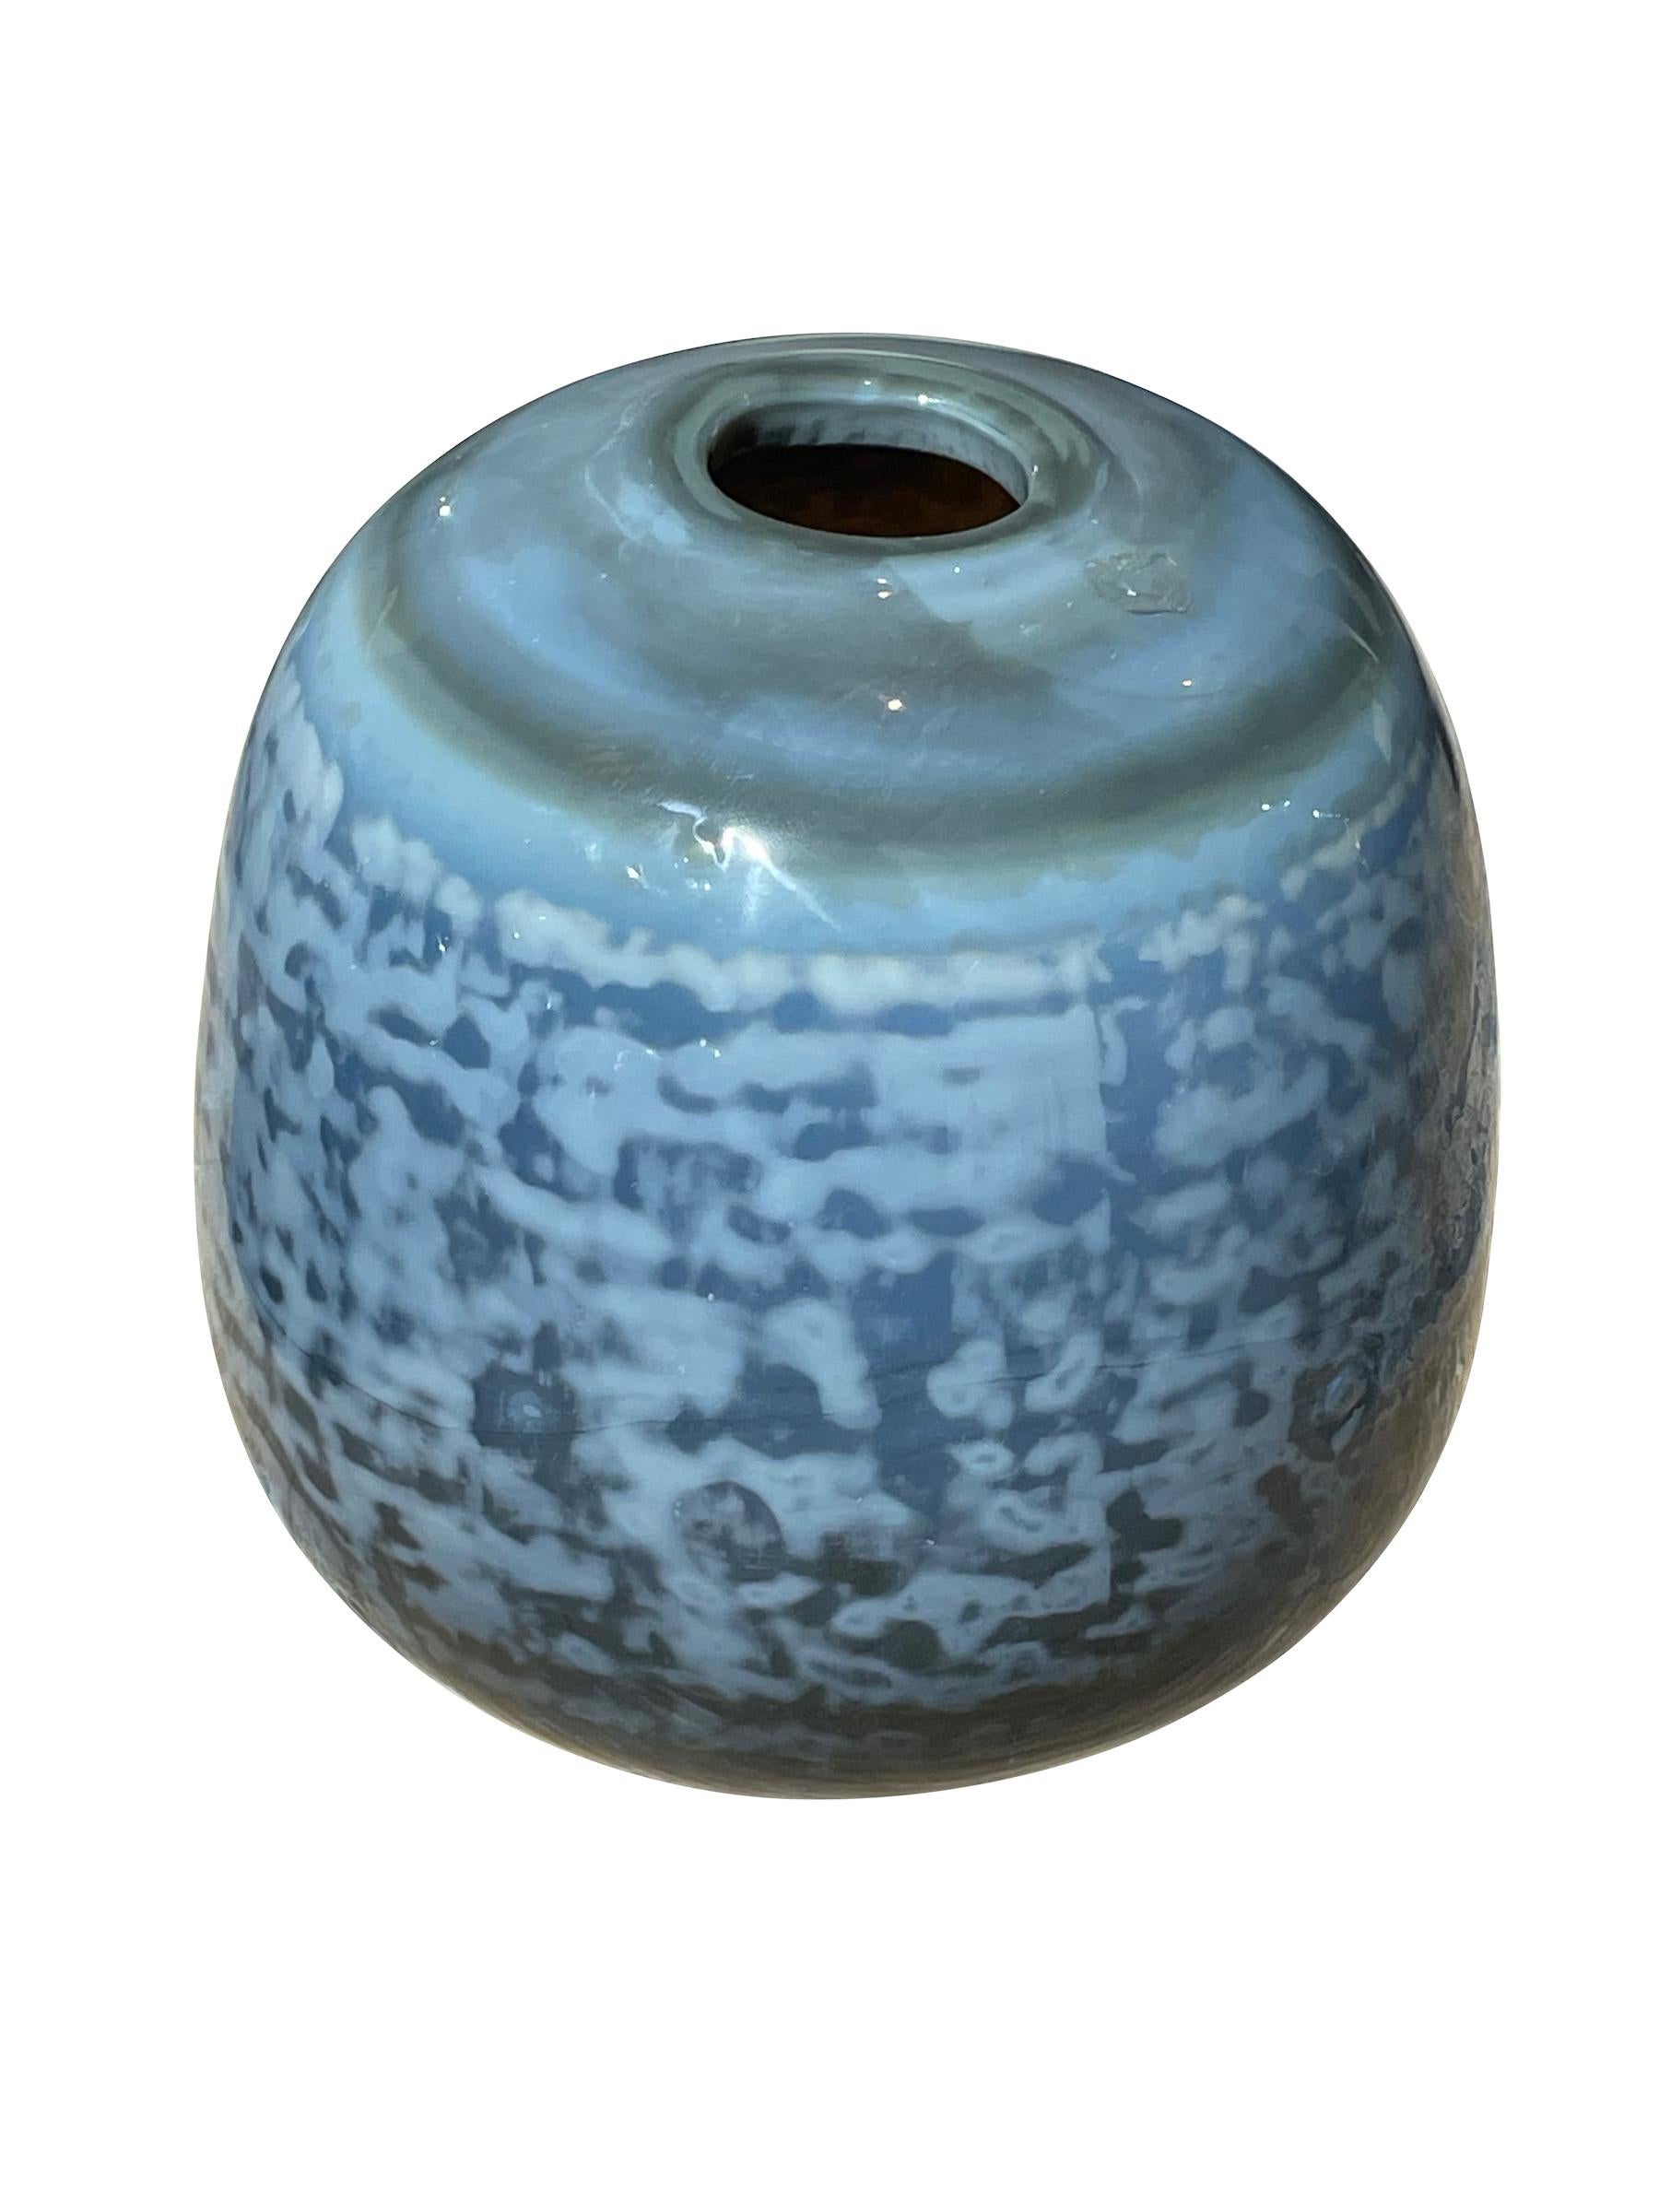 Contemporary Romanian glass vase with speckle design
Shades of blue, grey and green
Two available
